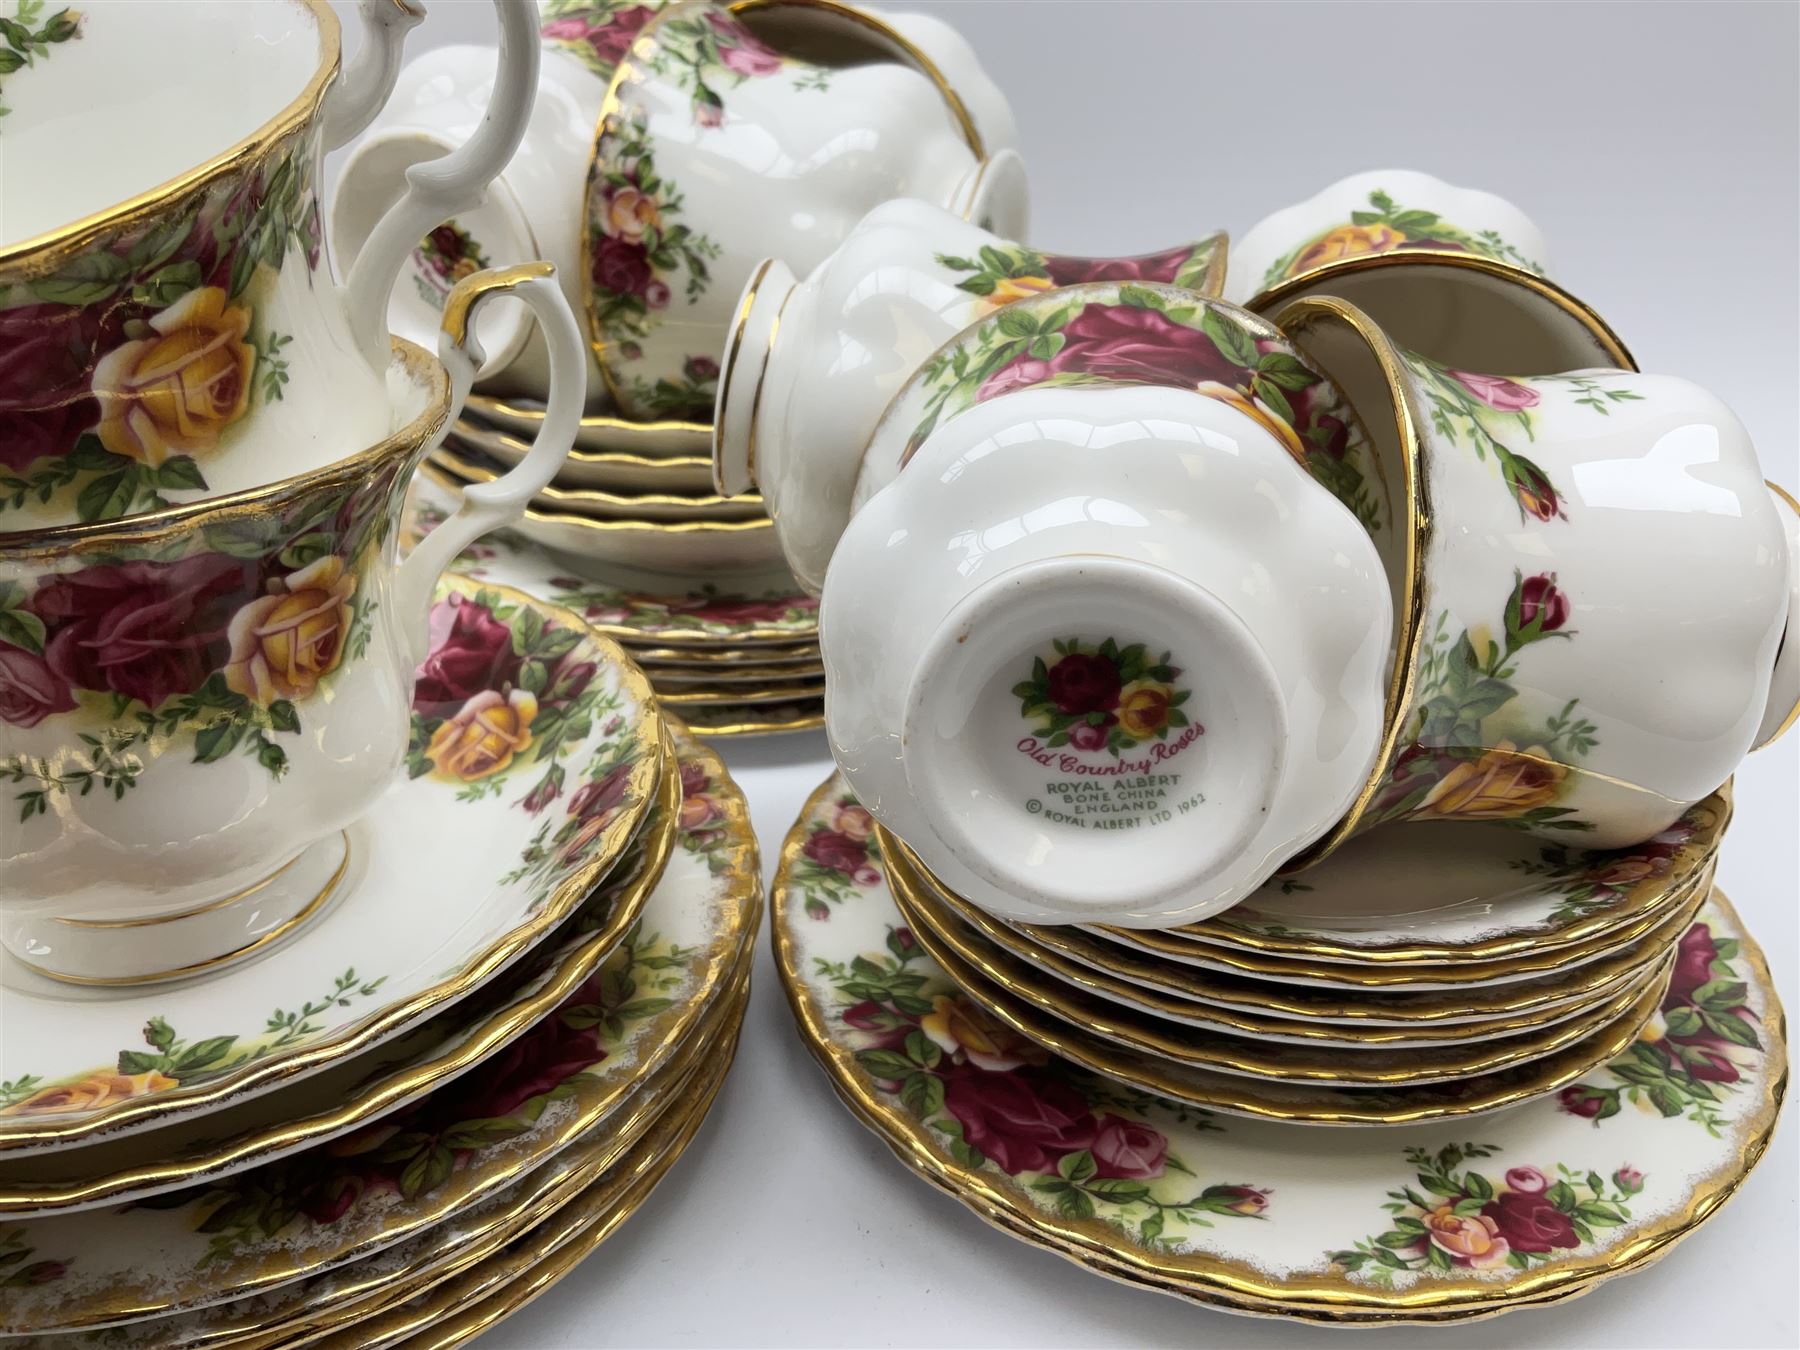 Royal Albert Old Country Roses teawares and cake stands - Image 5 of 5